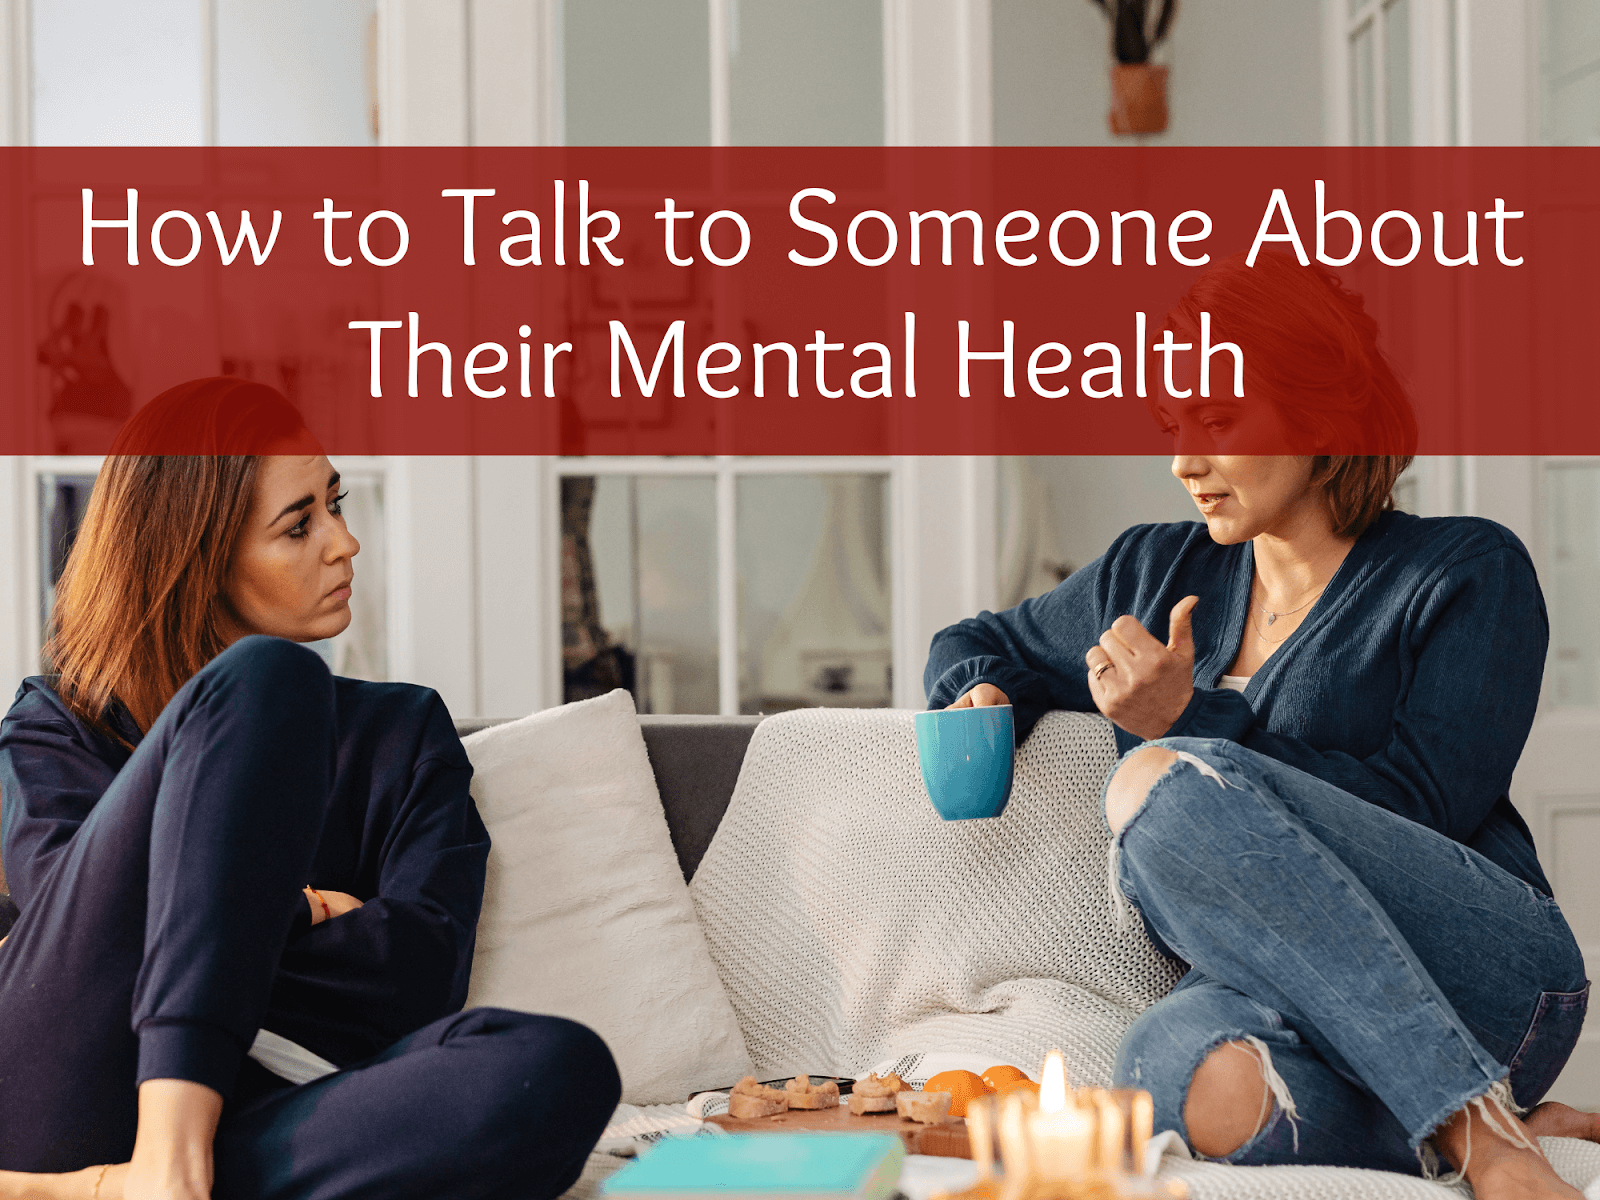 How to Talk to Someone About Their Mental Health